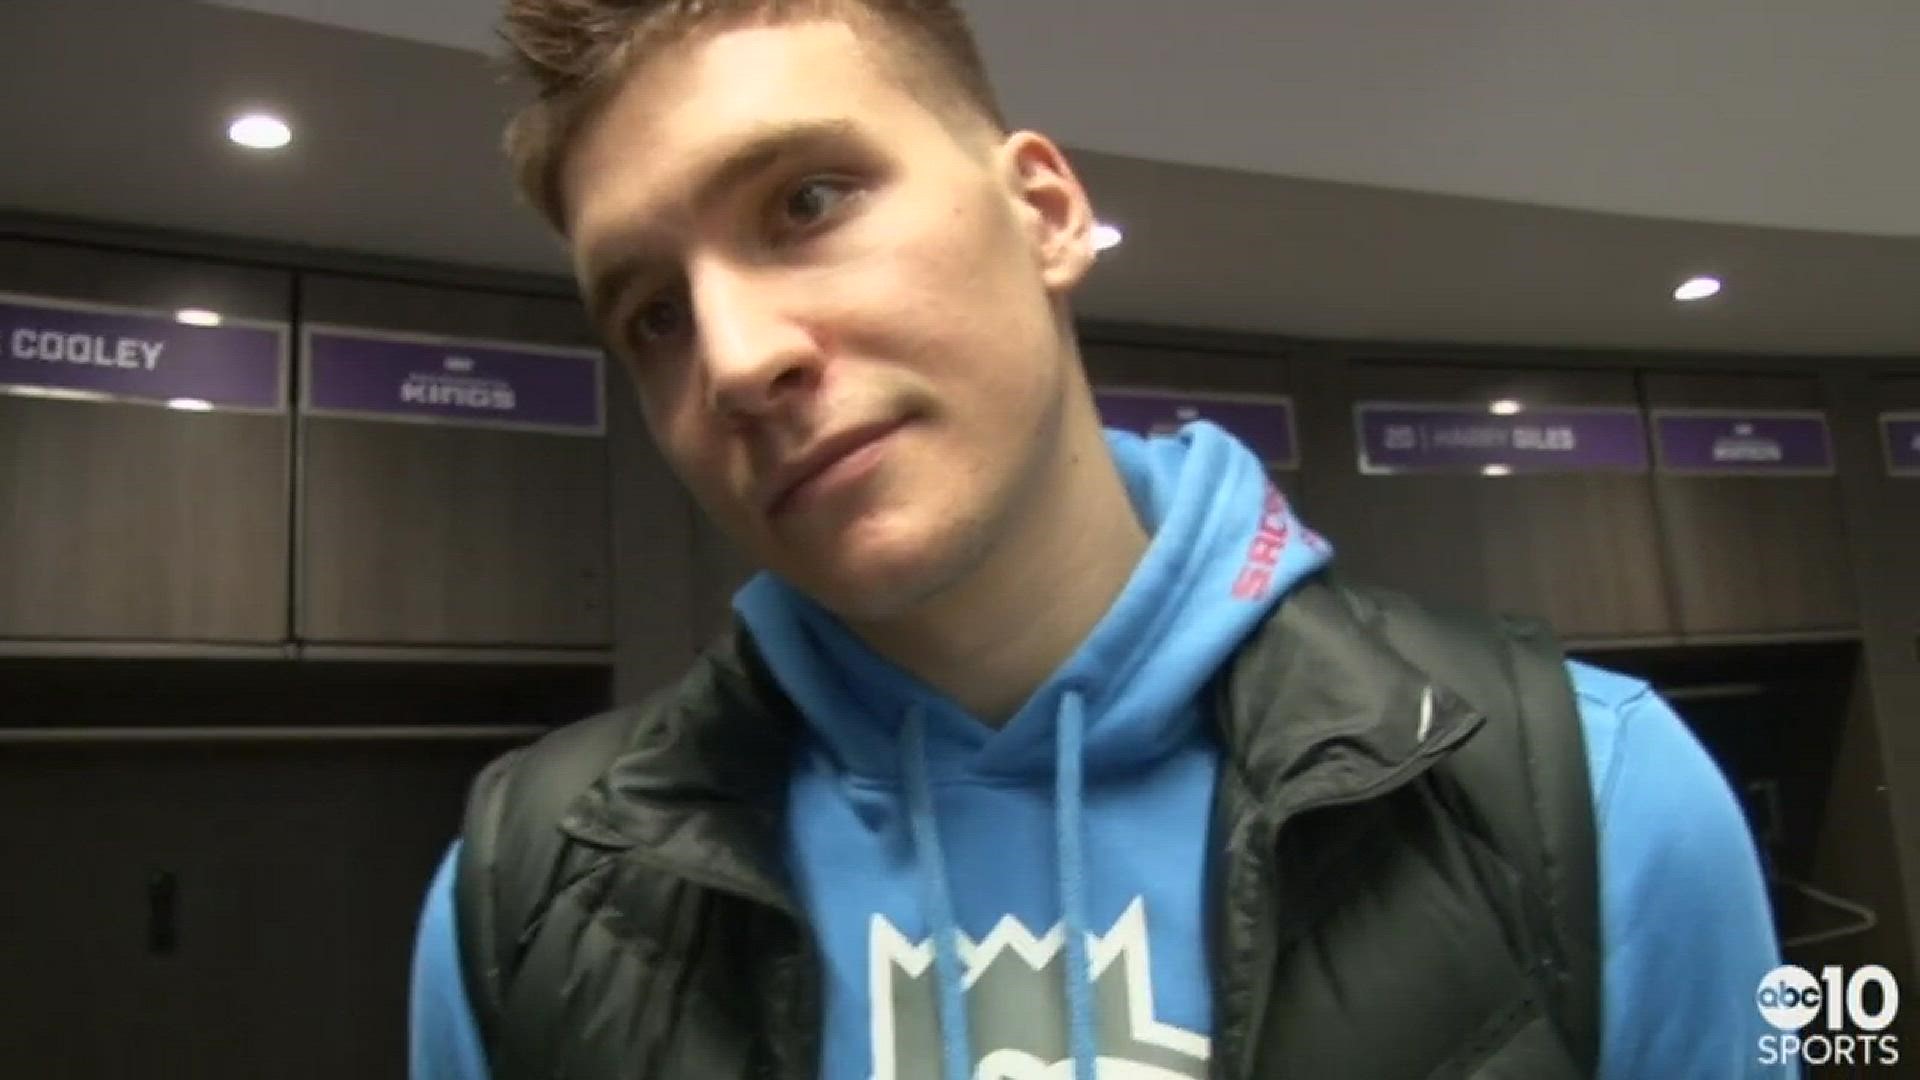 Kings rookie guard Bogdan Bogdanovic talks about Wednesday's overtime win over the Miami Heat and his deep three in OT to help seal the win.